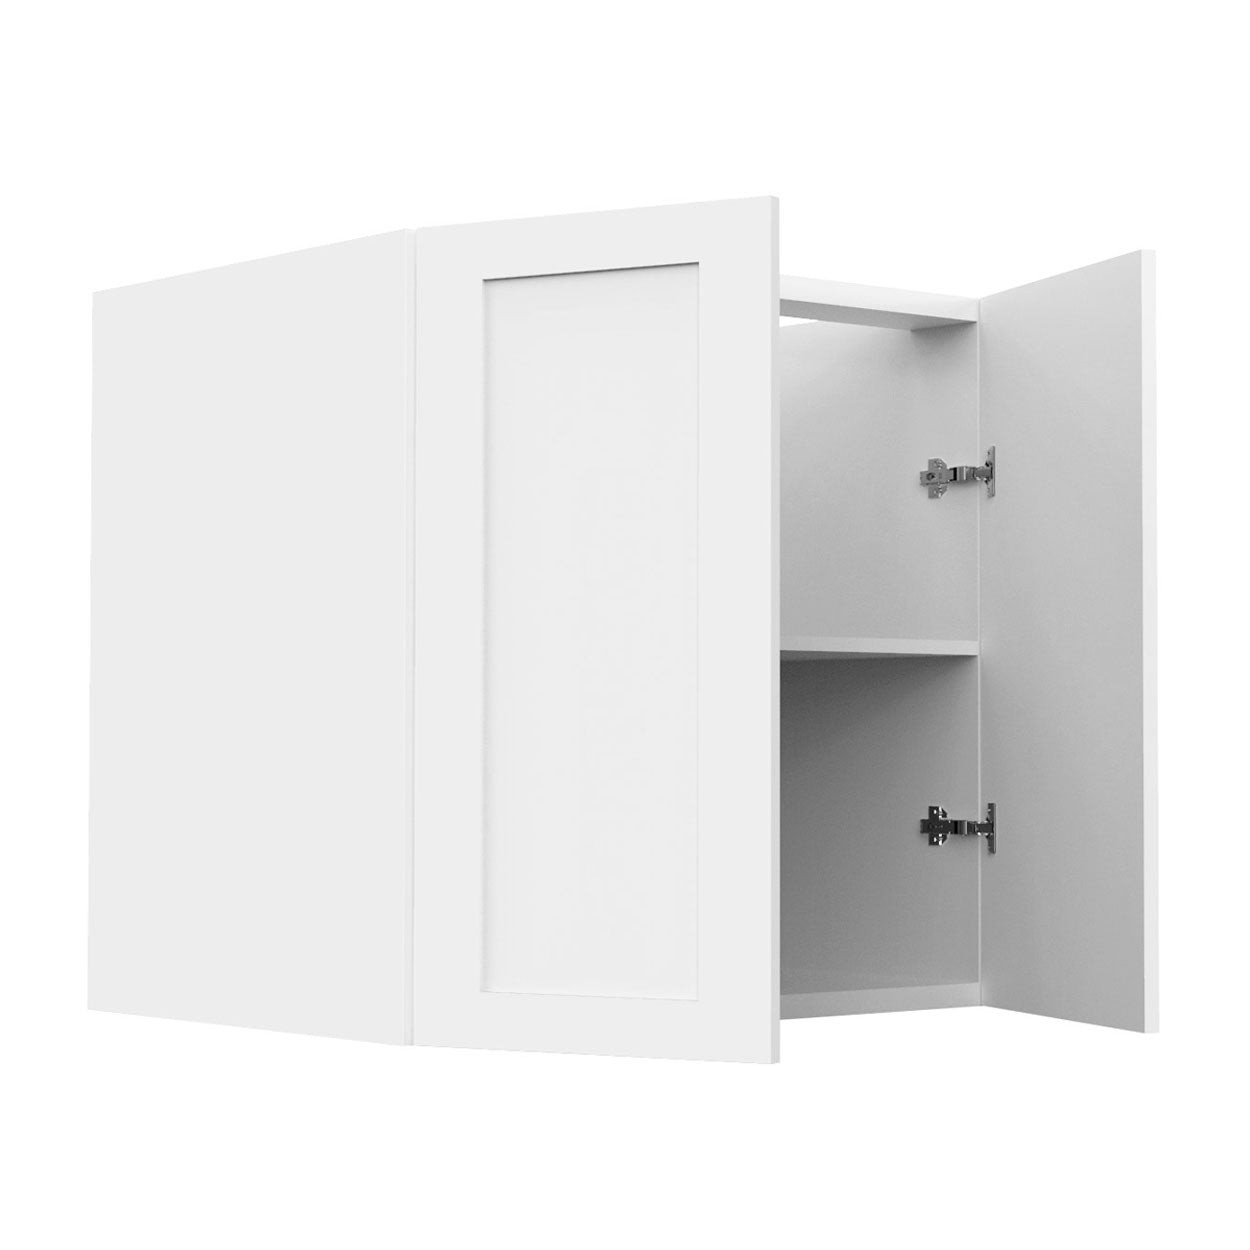 RTA - White Shaker - Full Height Double Door Base Cabinets | 30"W x 30"H x 23.8"D